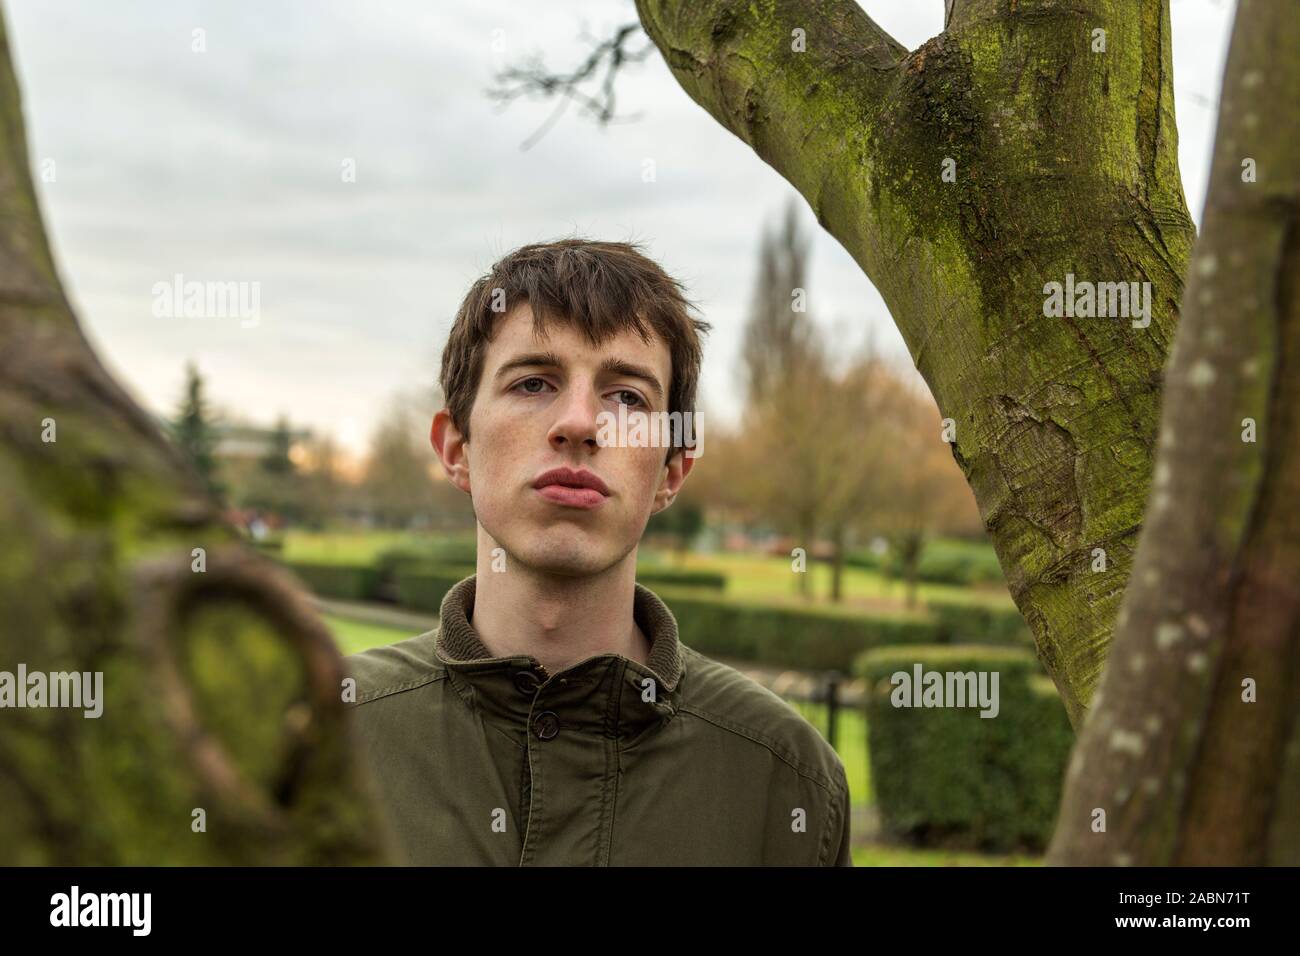 A pensive young man standing among trees looks out with an air of melancholy. Stock Photo